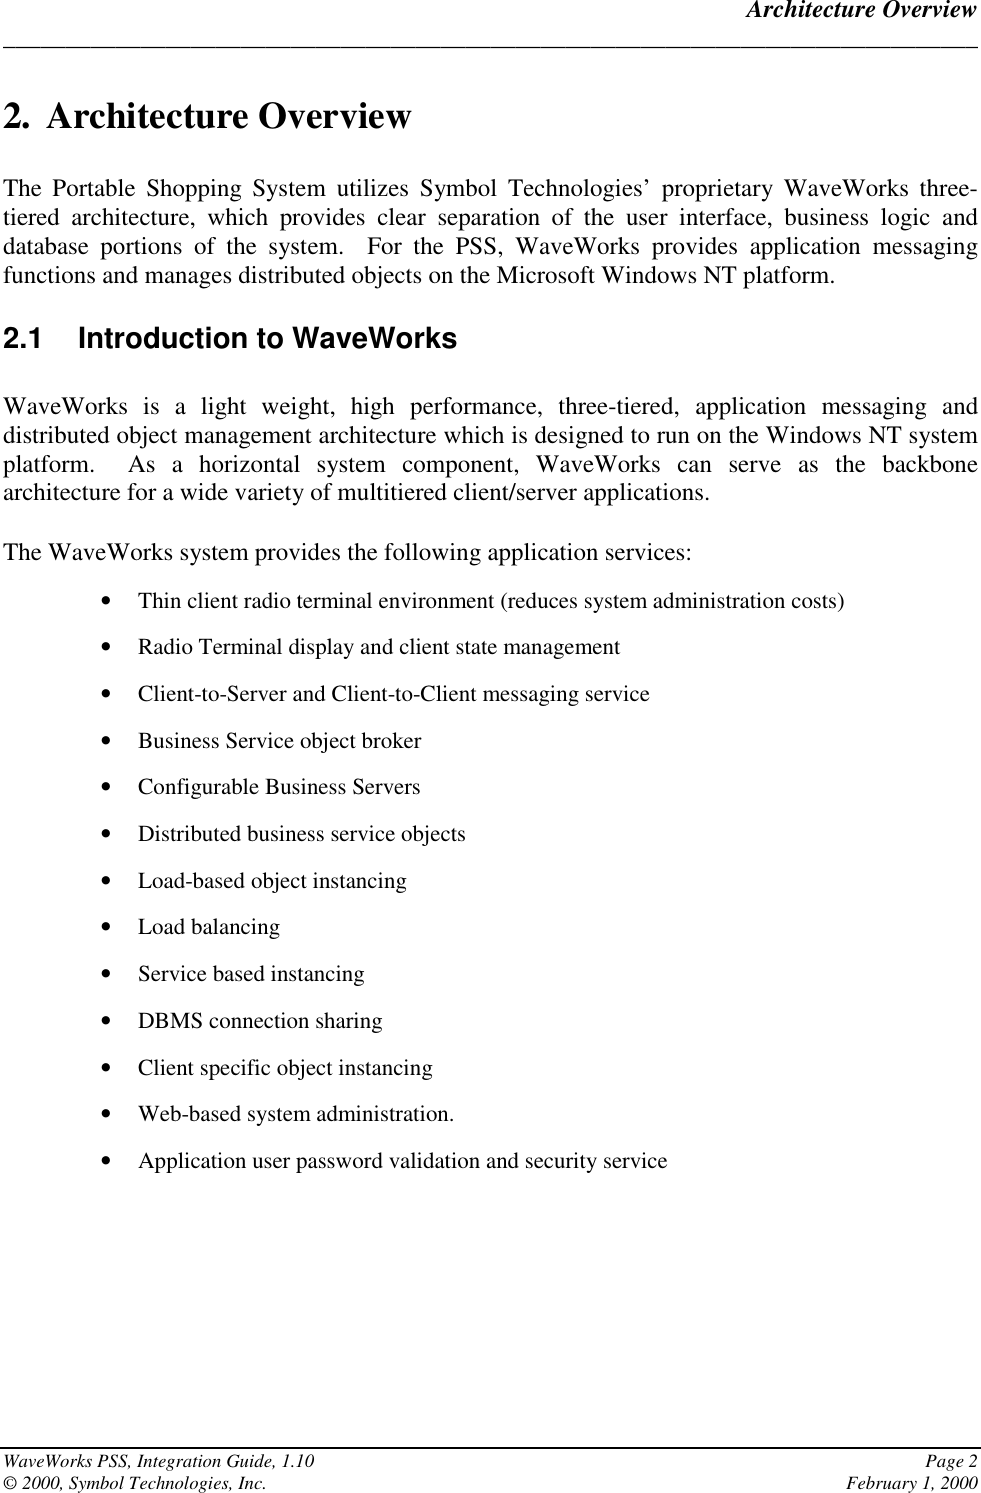 Architecture Overview______________________________________________________________________________WaveWorks PSS, Integration Guide, 1.10 Page 2© 2000, Symbol Technologies, Inc. February 1, 20002. Architecture OverviewThe Portable Shopping System utilizes Symbol Technologies’ proprietary WaveWorks three-tiered architecture, which provides clear separation of the user interface, business logic anddatabase portions of the system.  For the PSS, WaveWorks provides application messagingfunctions and manages distributed objects on the Microsoft Windows NT platform.2.1  Introduction to WaveWorksWaveWorks is a light weight, high performance, three-tiered, application messaging anddistributed object management architecture which is designed to run on the Windows NT systemplatform.  As a horizontal system component, WaveWorks can serve as the backbonearchitecture for a wide variety of multitiered client/server applications.The WaveWorks system provides the following application services:• Thin client radio terminal environment (reduces system administration costs)• Radio Terminal display and client state management• Client-to-Server and Client-to-Client messaging service• Business Service object broker• Configurable Business Servers• Distributed business service objects• Load-based object instancing• Load balancing• Service based instancing• DBMS connection sharing• Client specific object instancing• Web-based system administration.• Application user password validation and security service